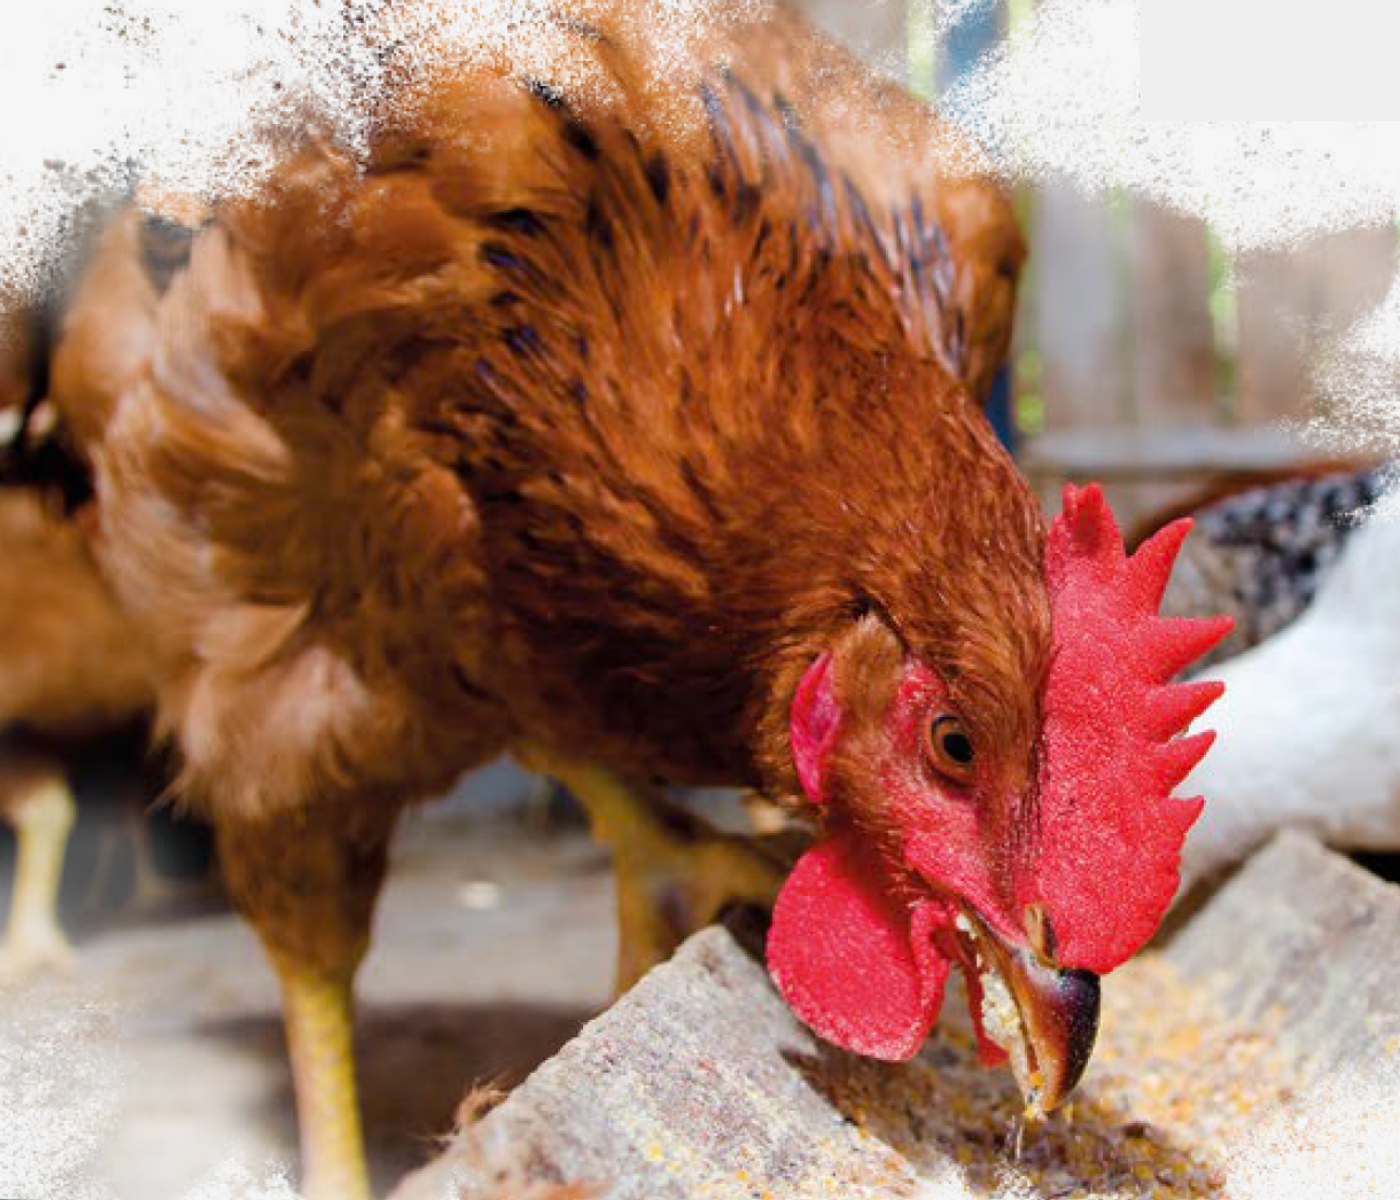 Critical points in the nutrition of laying hens